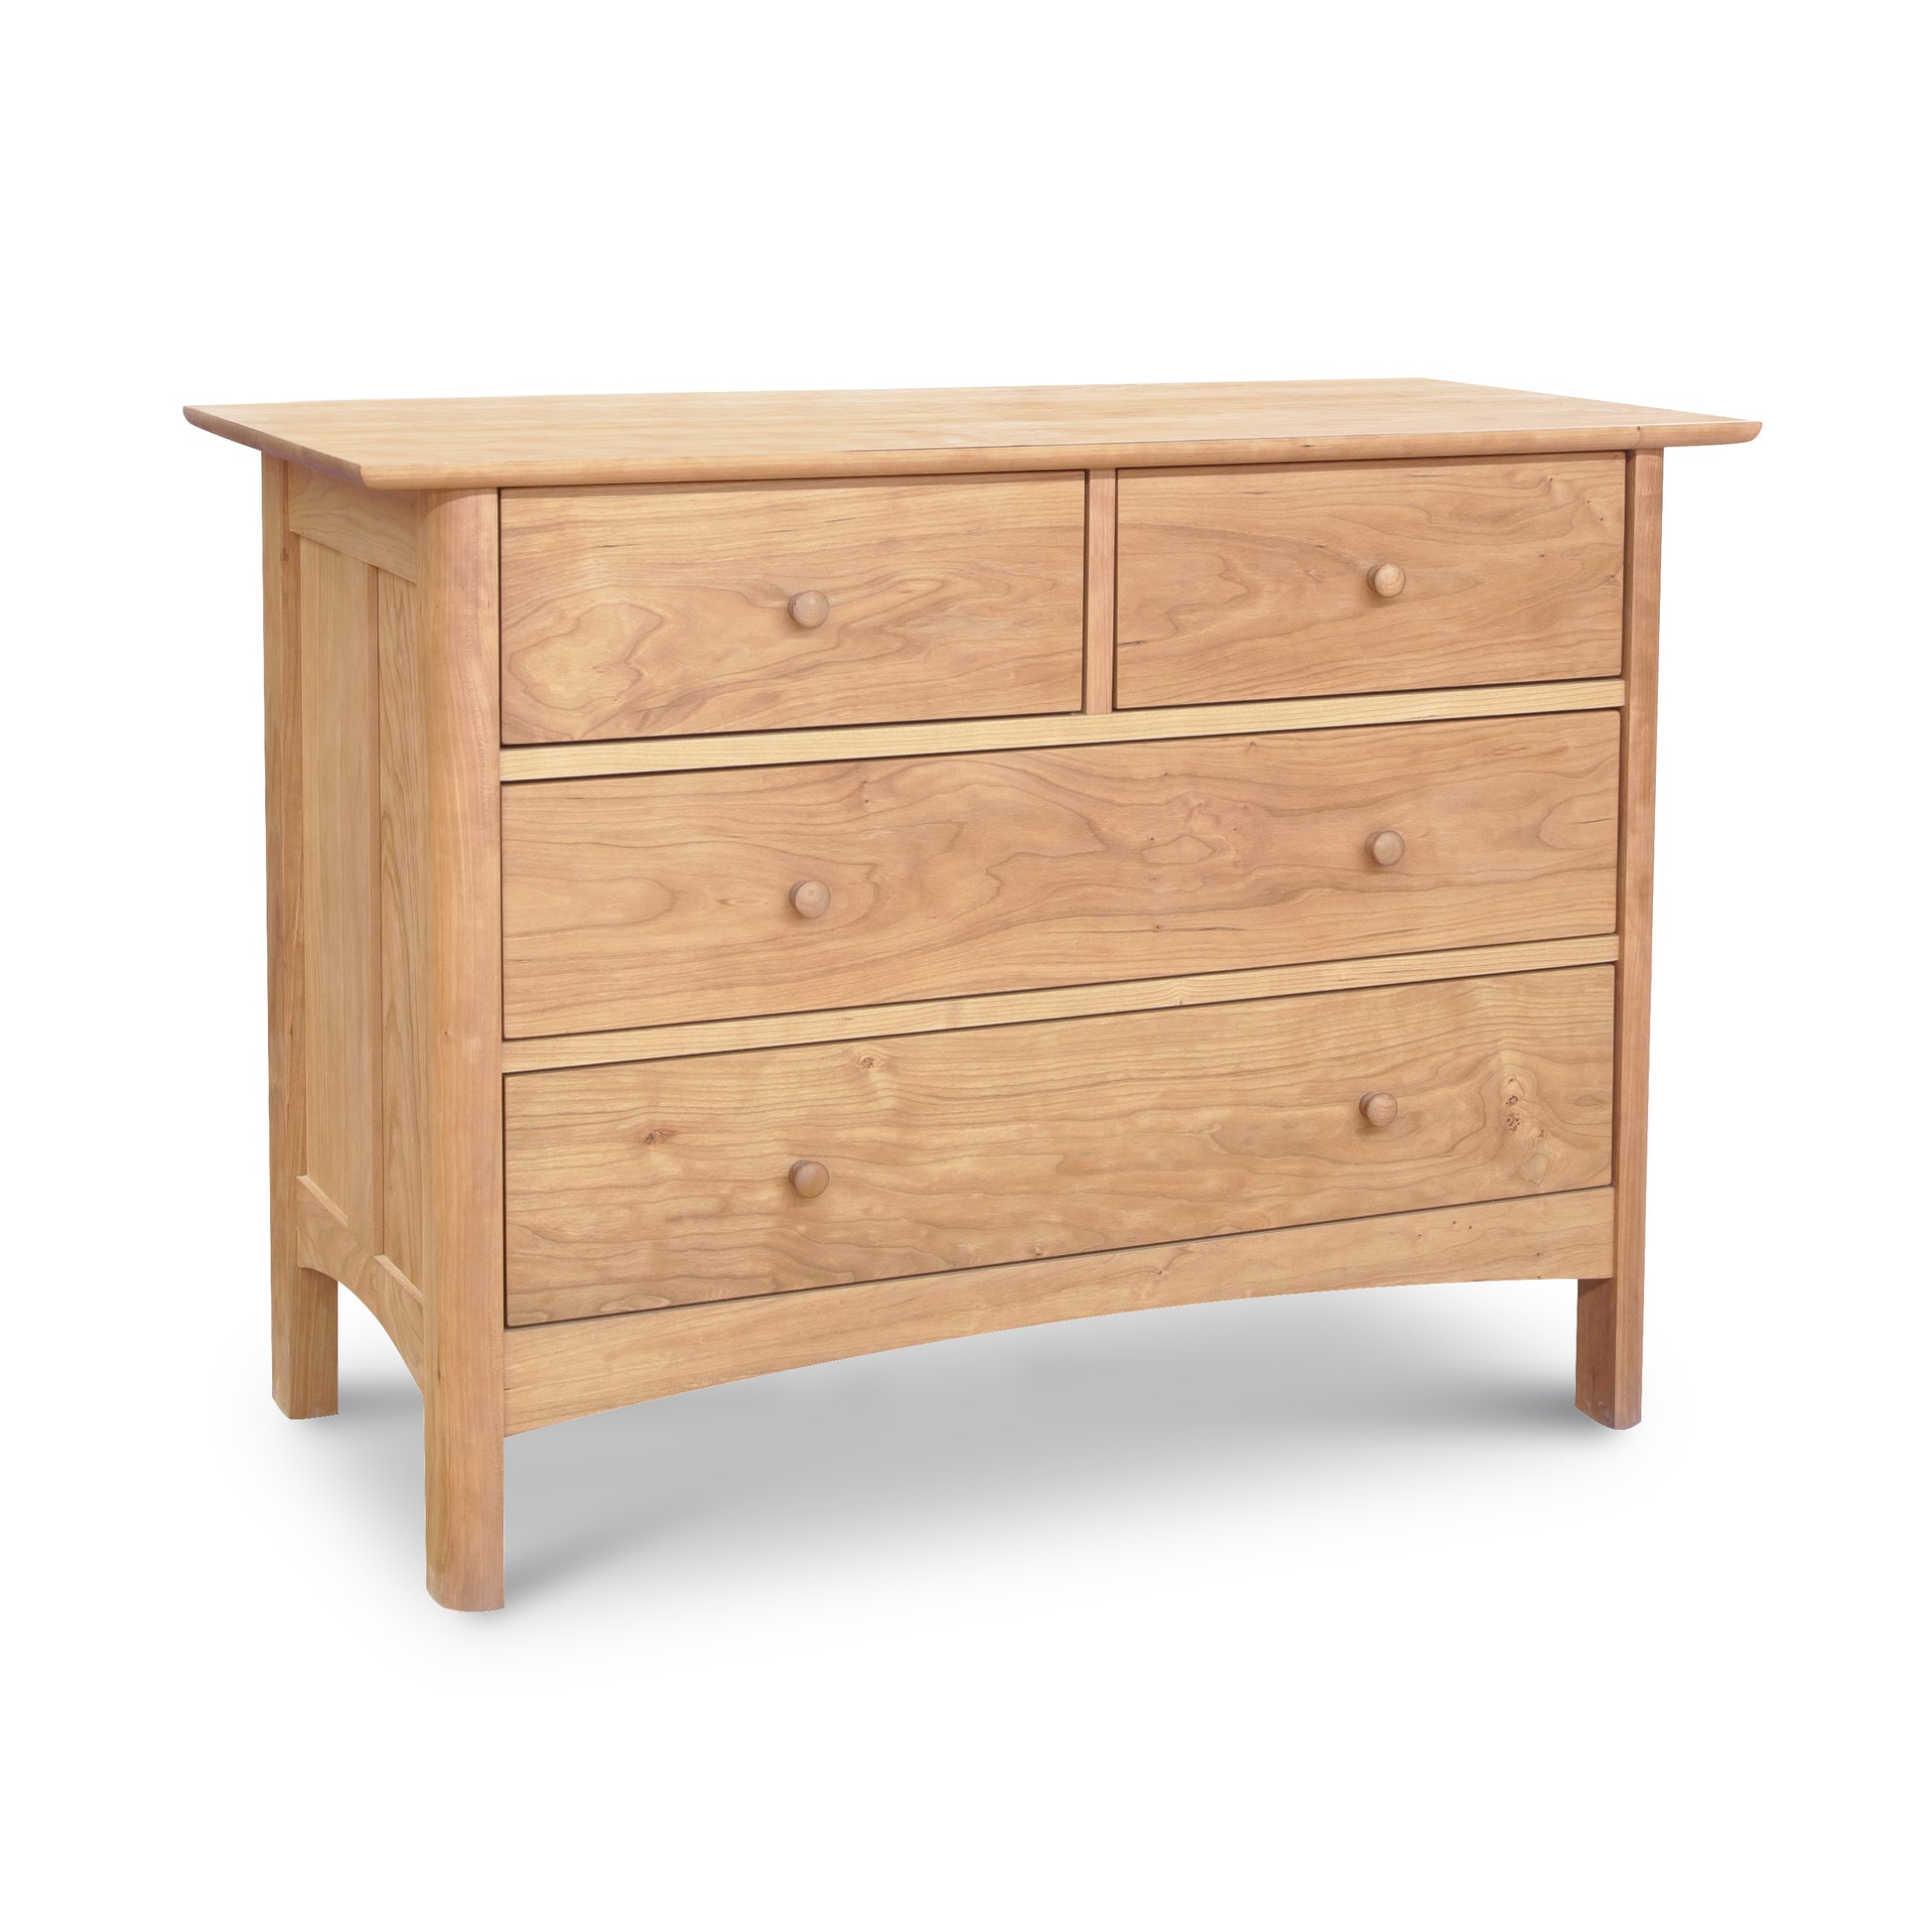 A Vermont Furniture Designs Heartwood Shaker 4-Drawer Dresser on a white background.